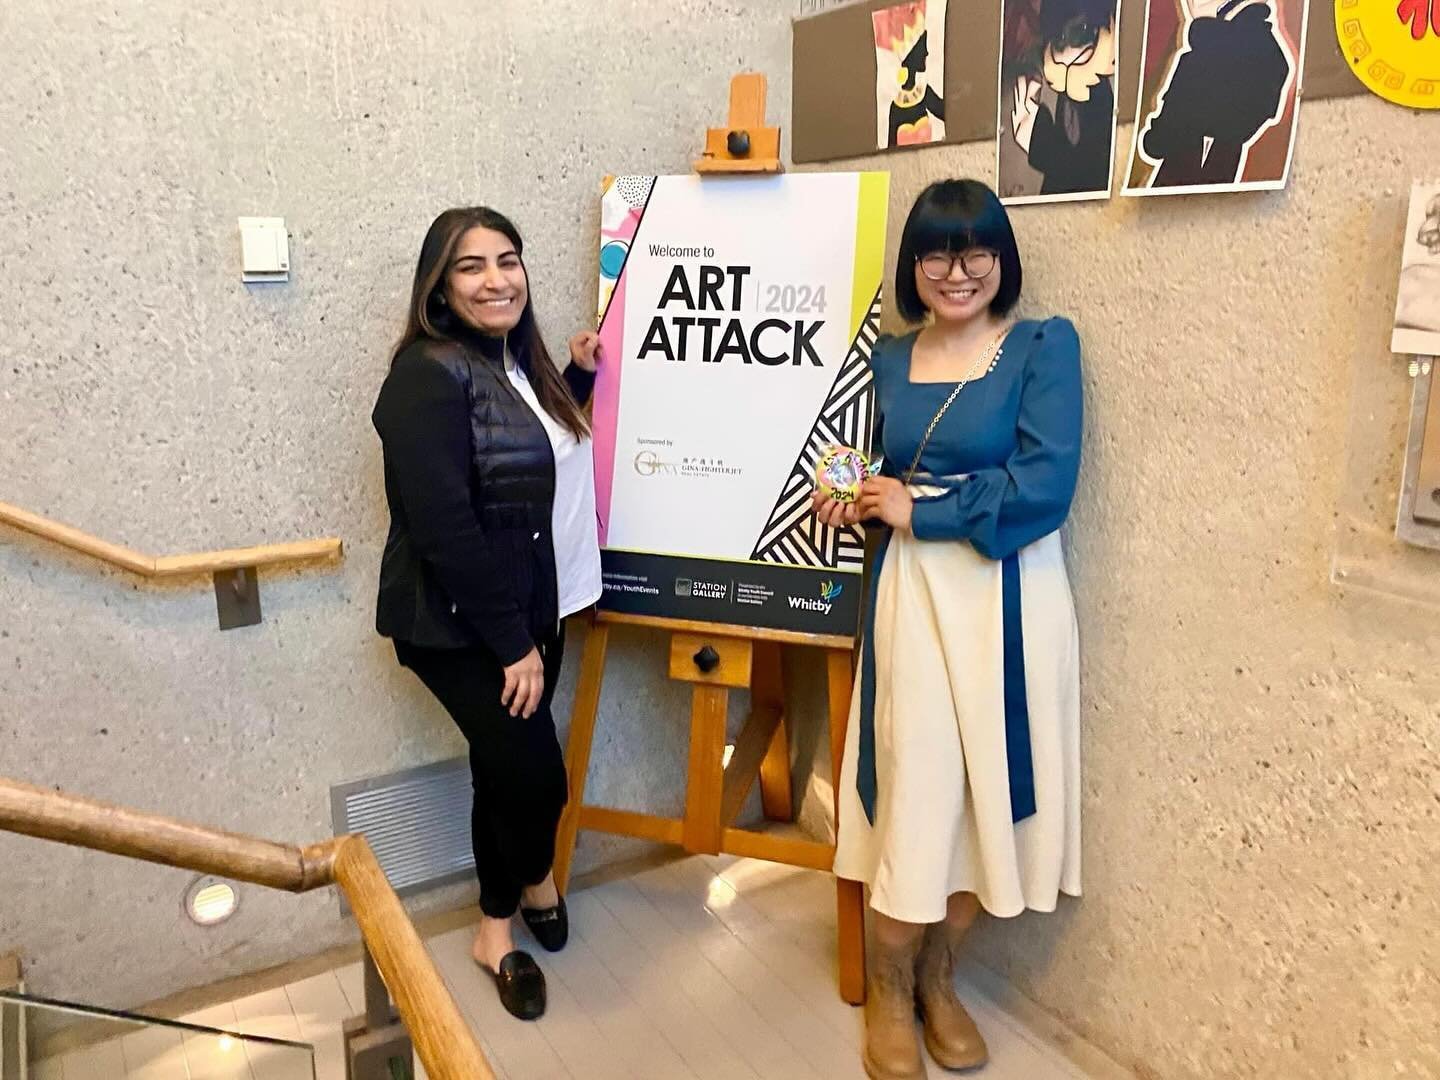 Fantastic Art Attack event at @stationgallery so proud to see Town of Whitby talented youth and their art work. #artattack